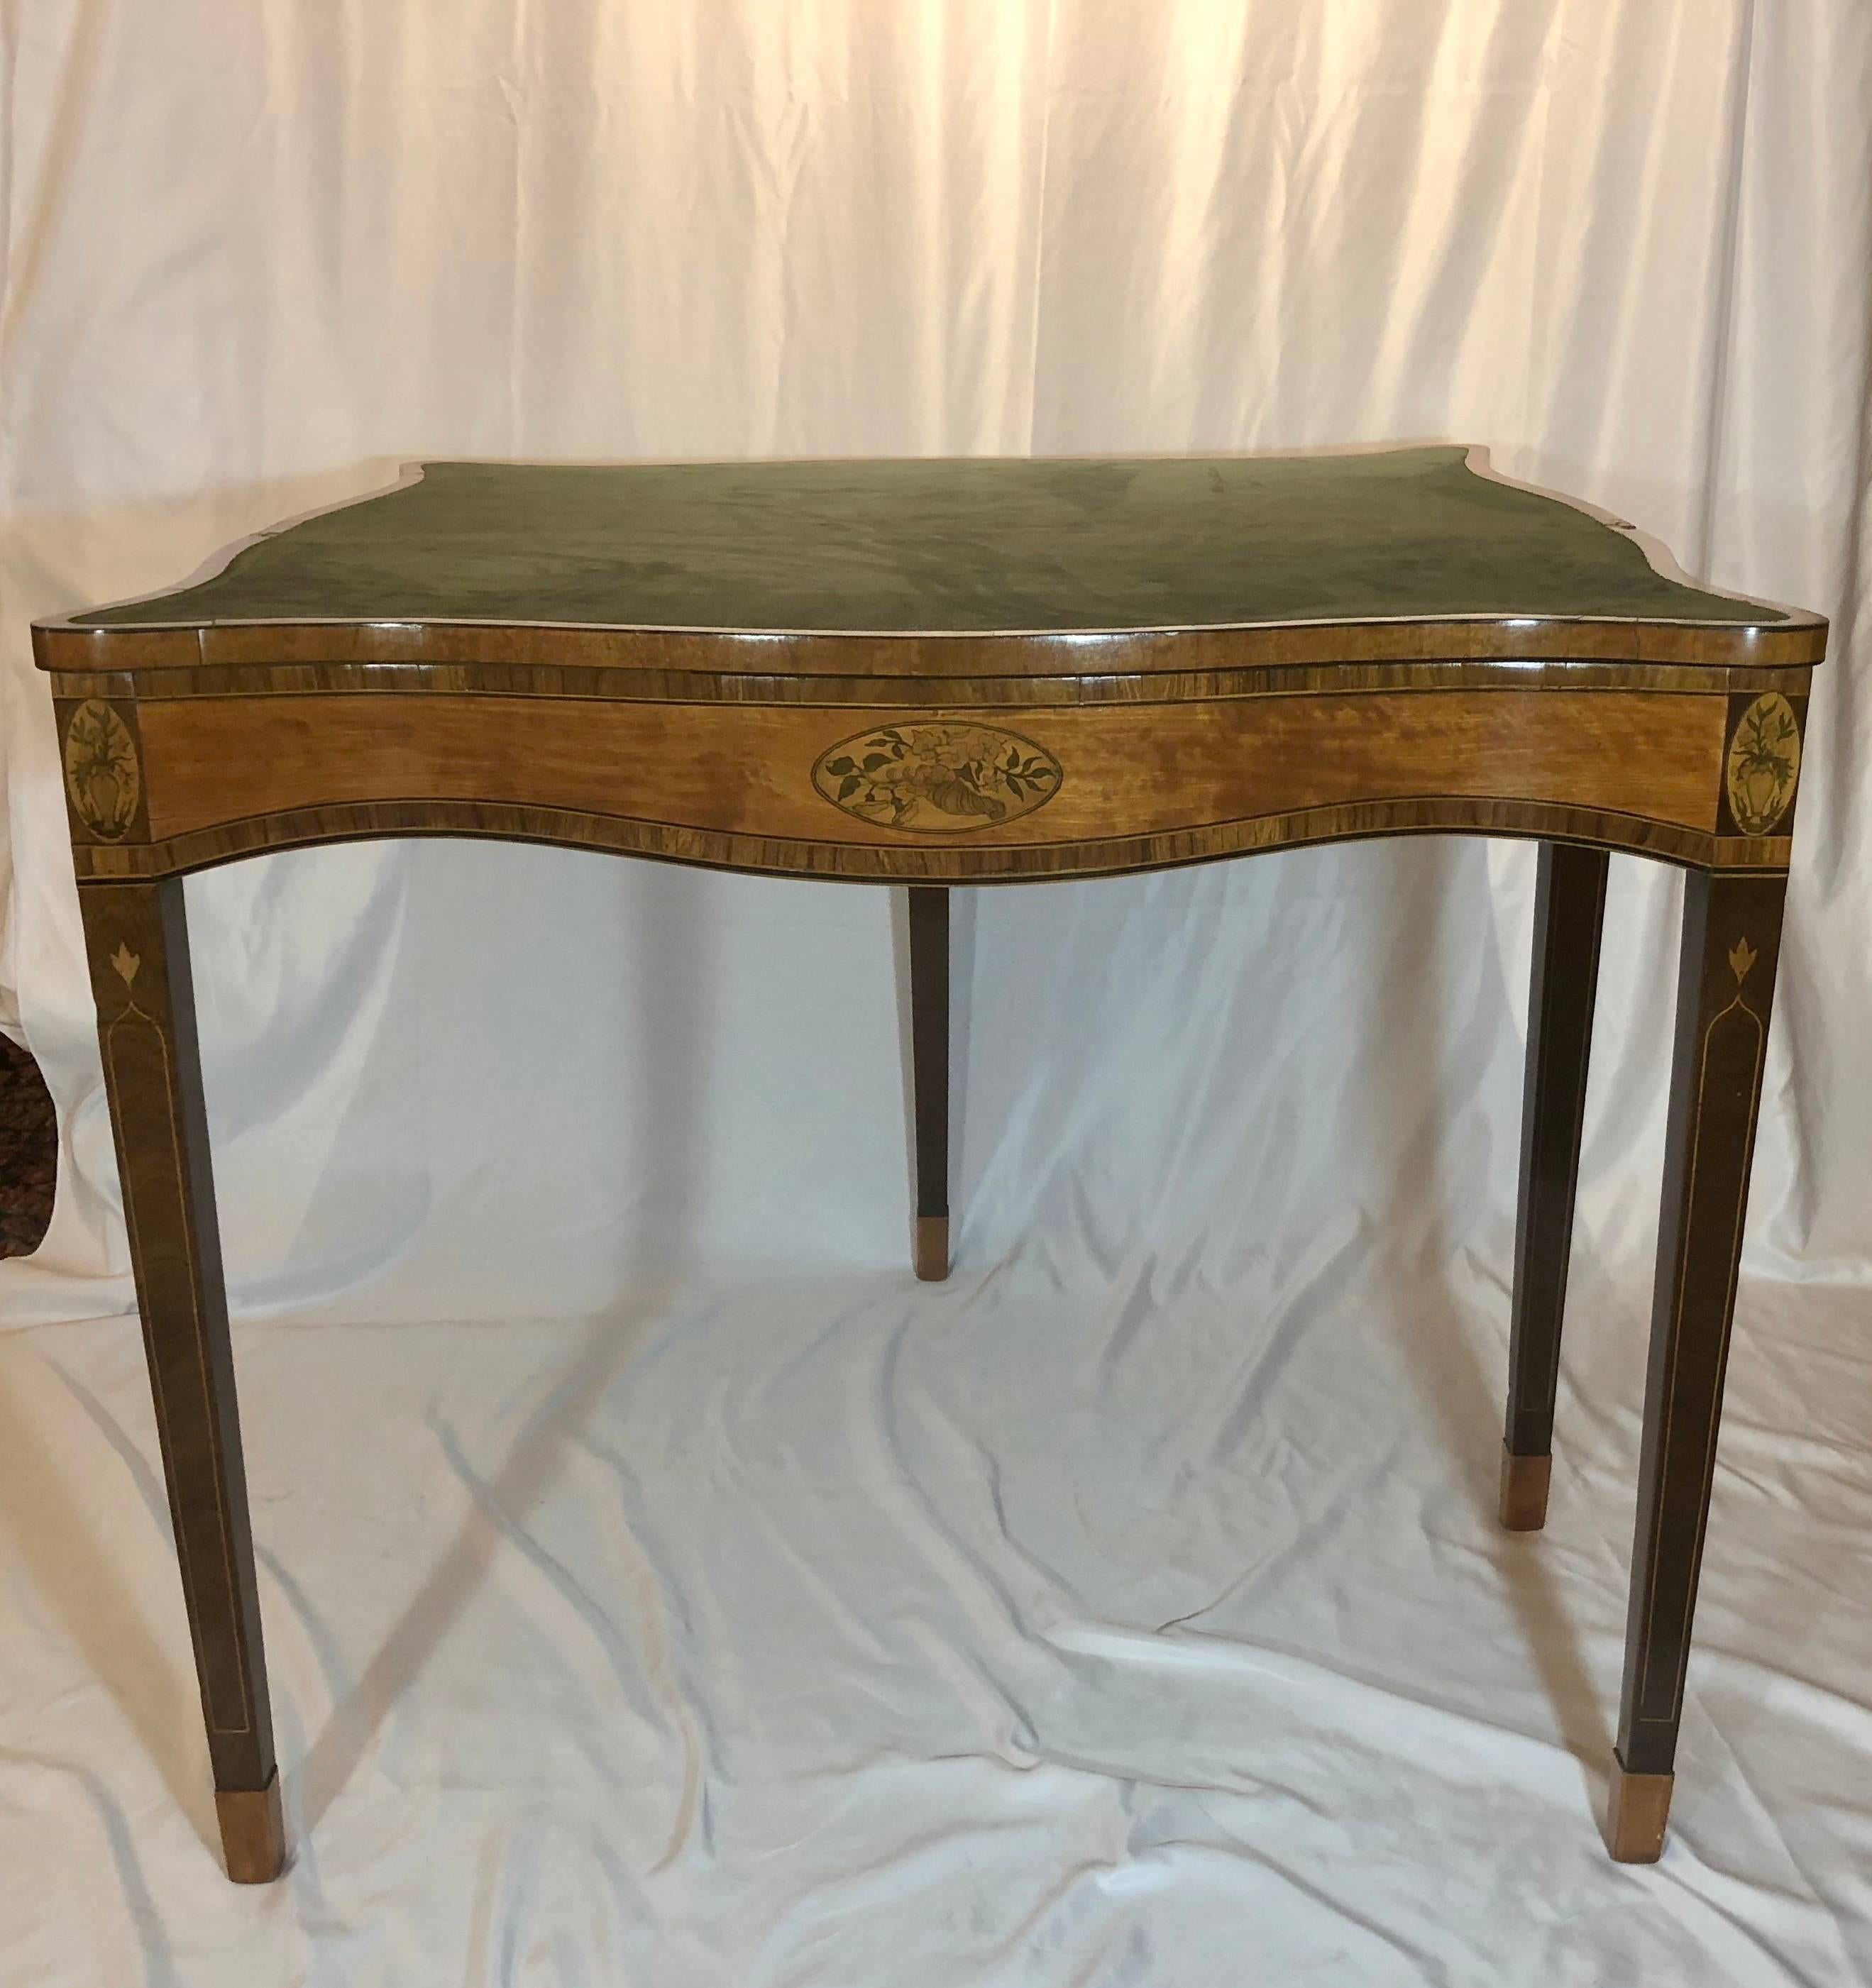 This side table opens to a good size for intimate dining or card playing. It is nicely polished.